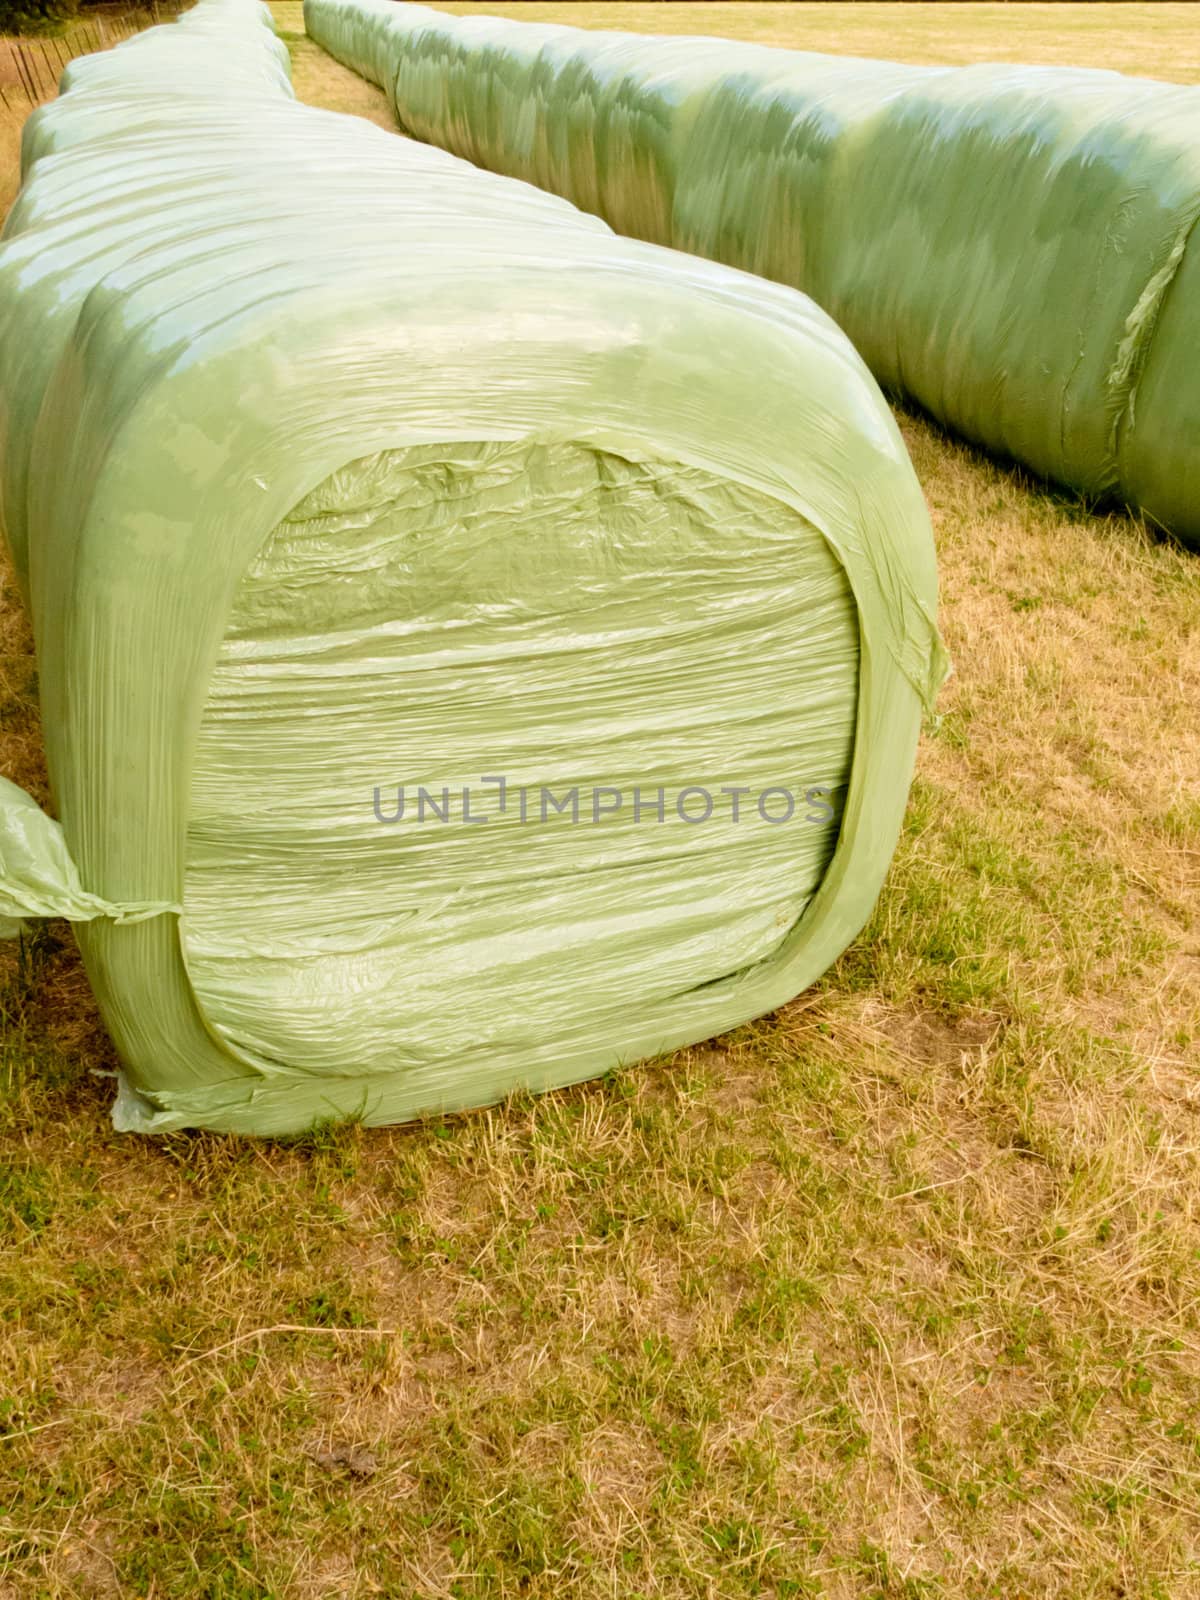 Haylage bales left outdoors for fermentation by PiLens